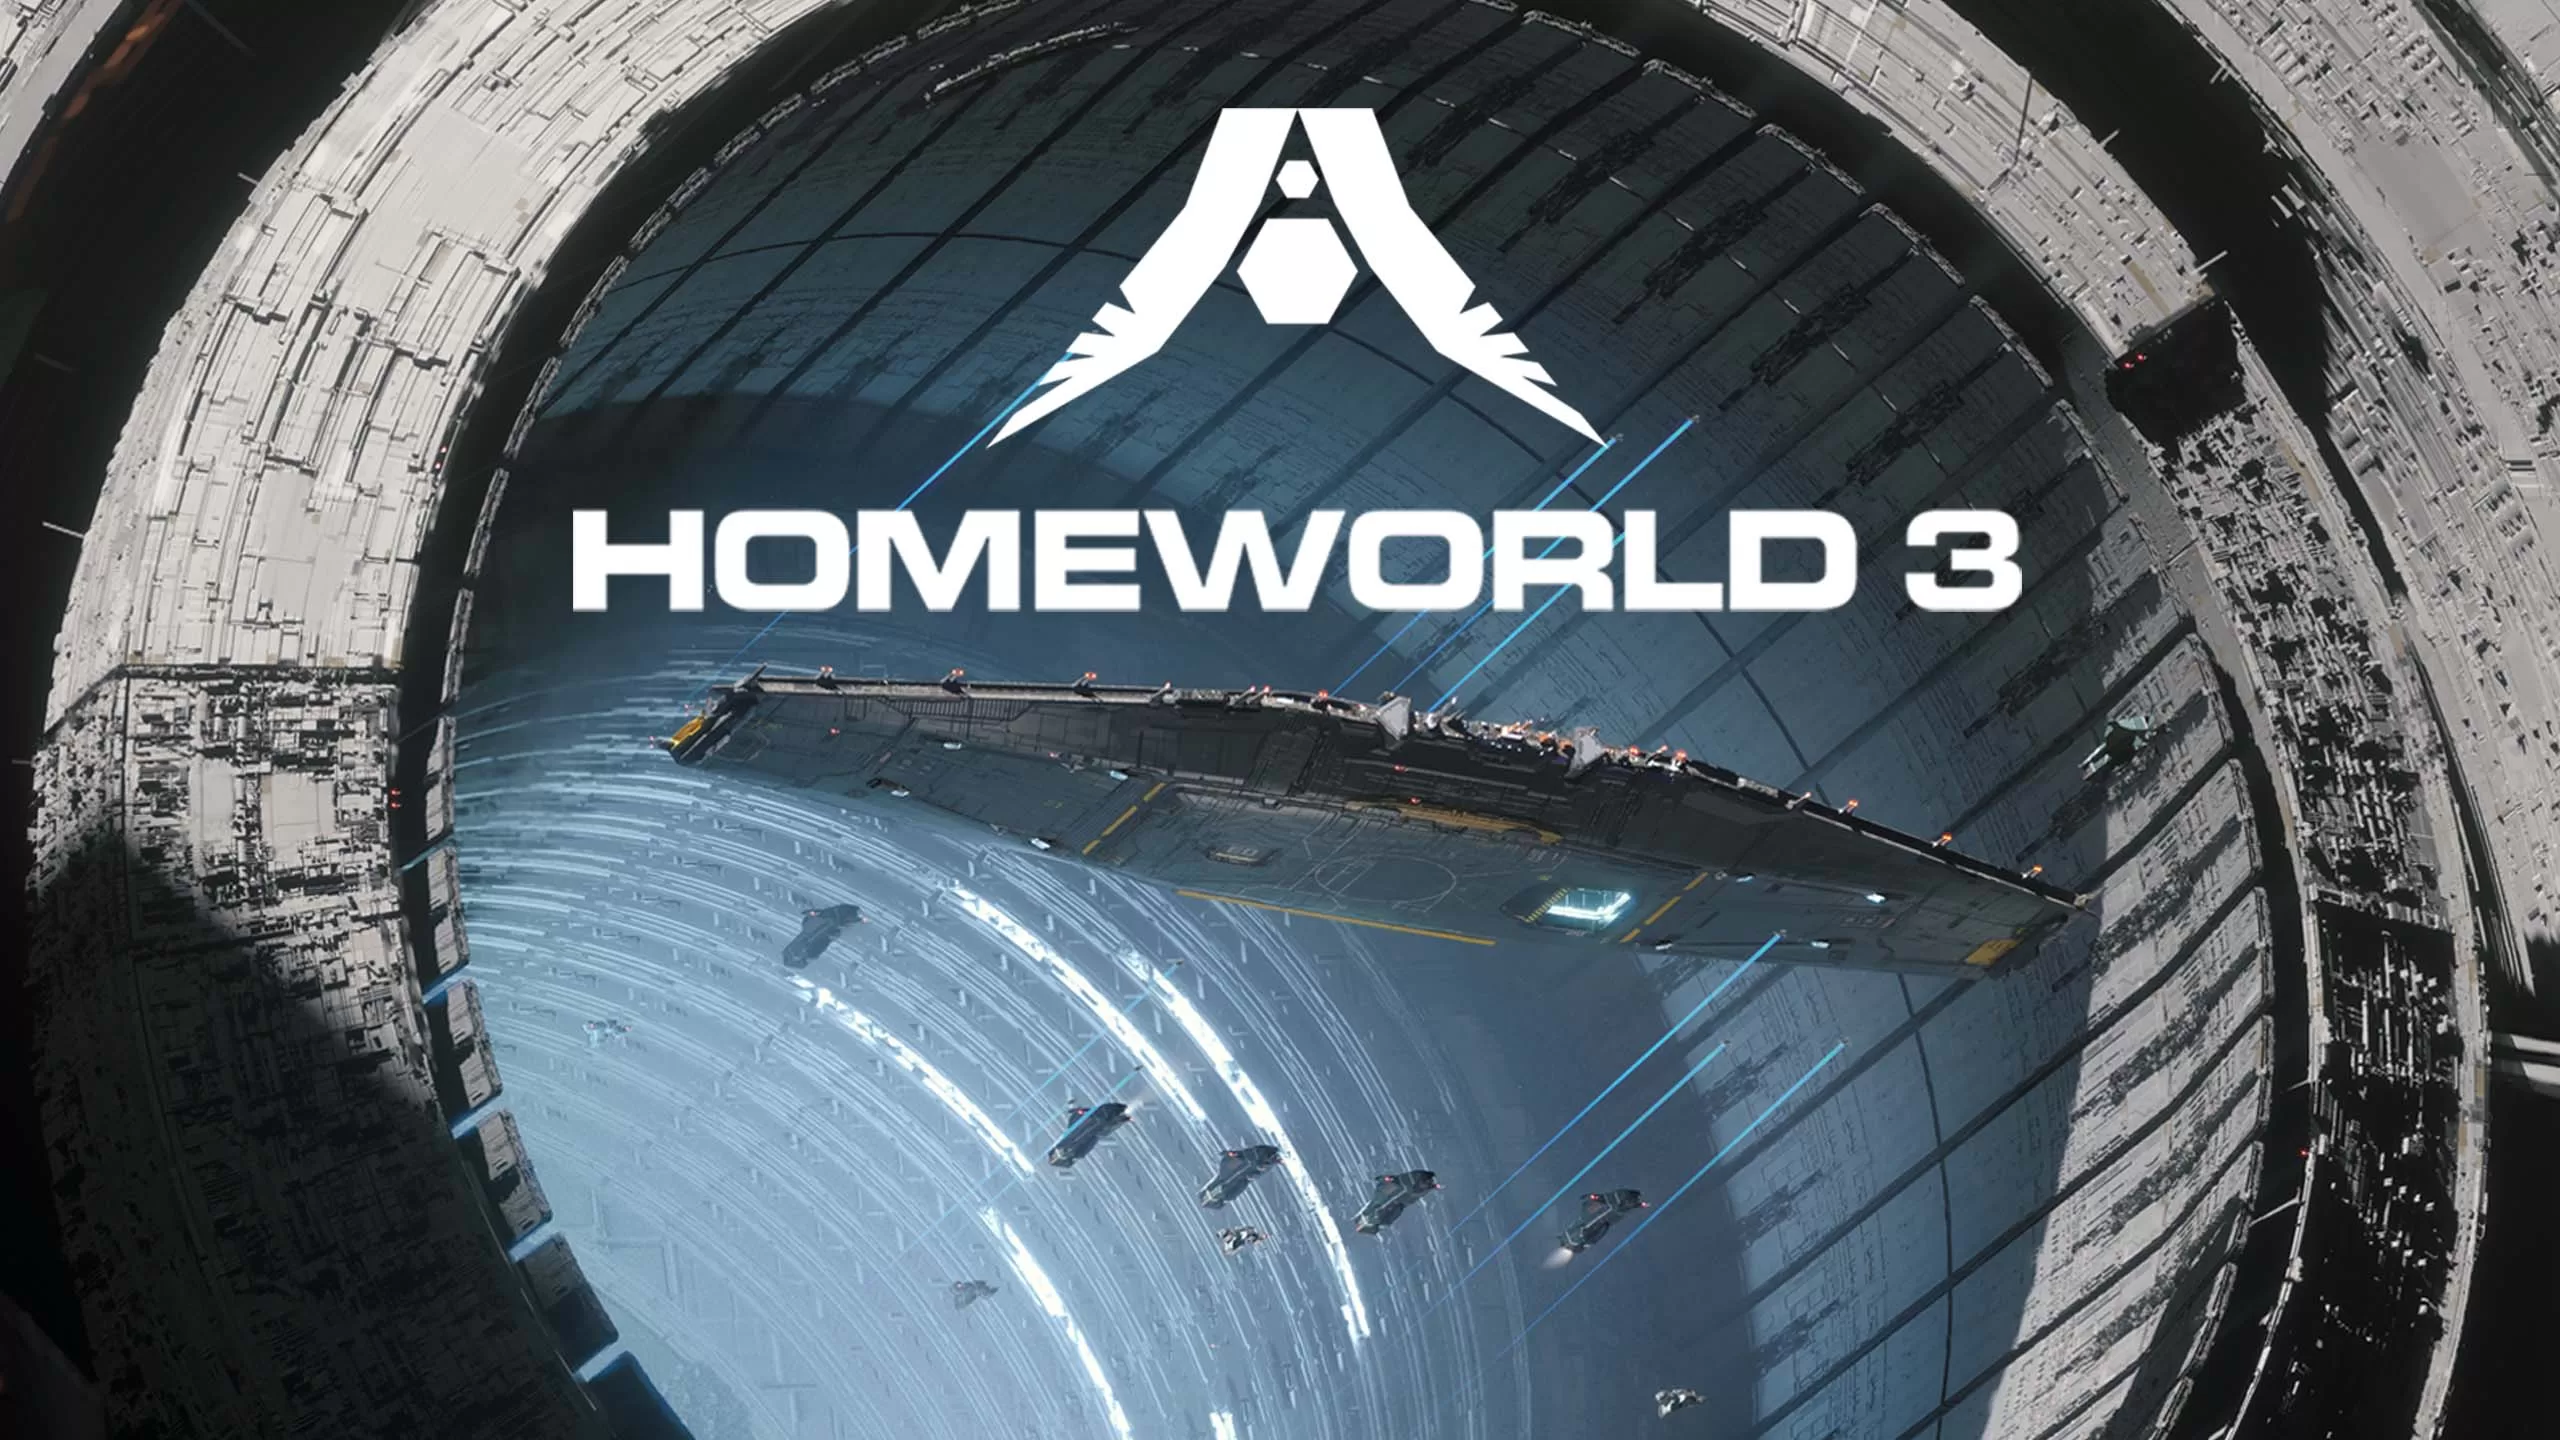 Homeworld 3: A New Dawn in Space Strategy Gaming